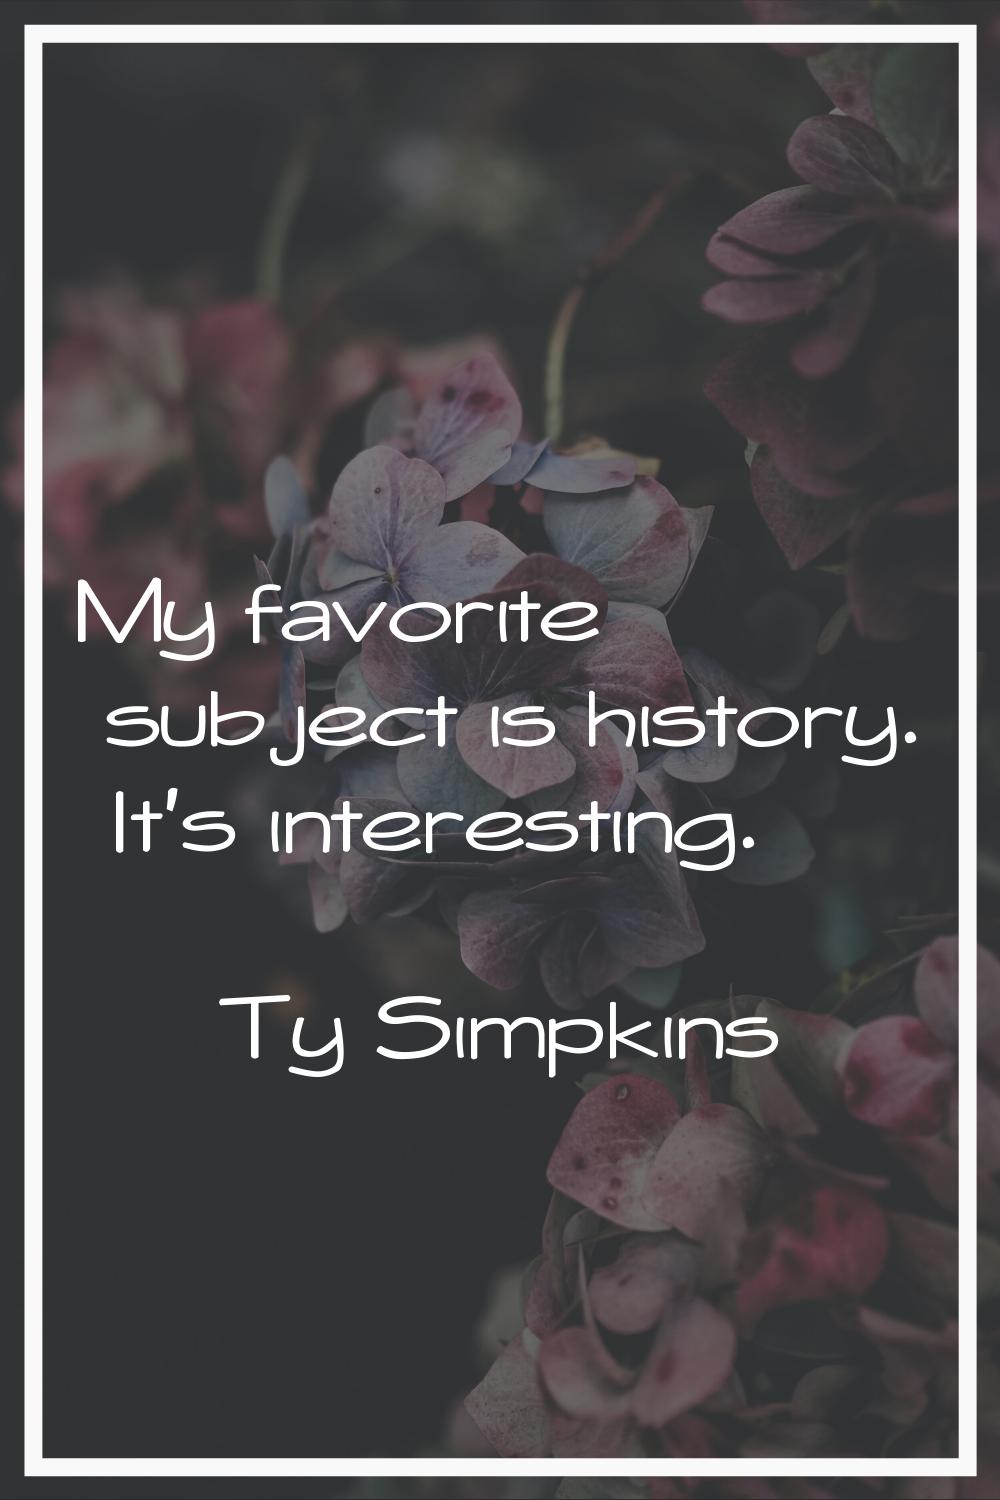 My favorite subject is history. It's interesting.